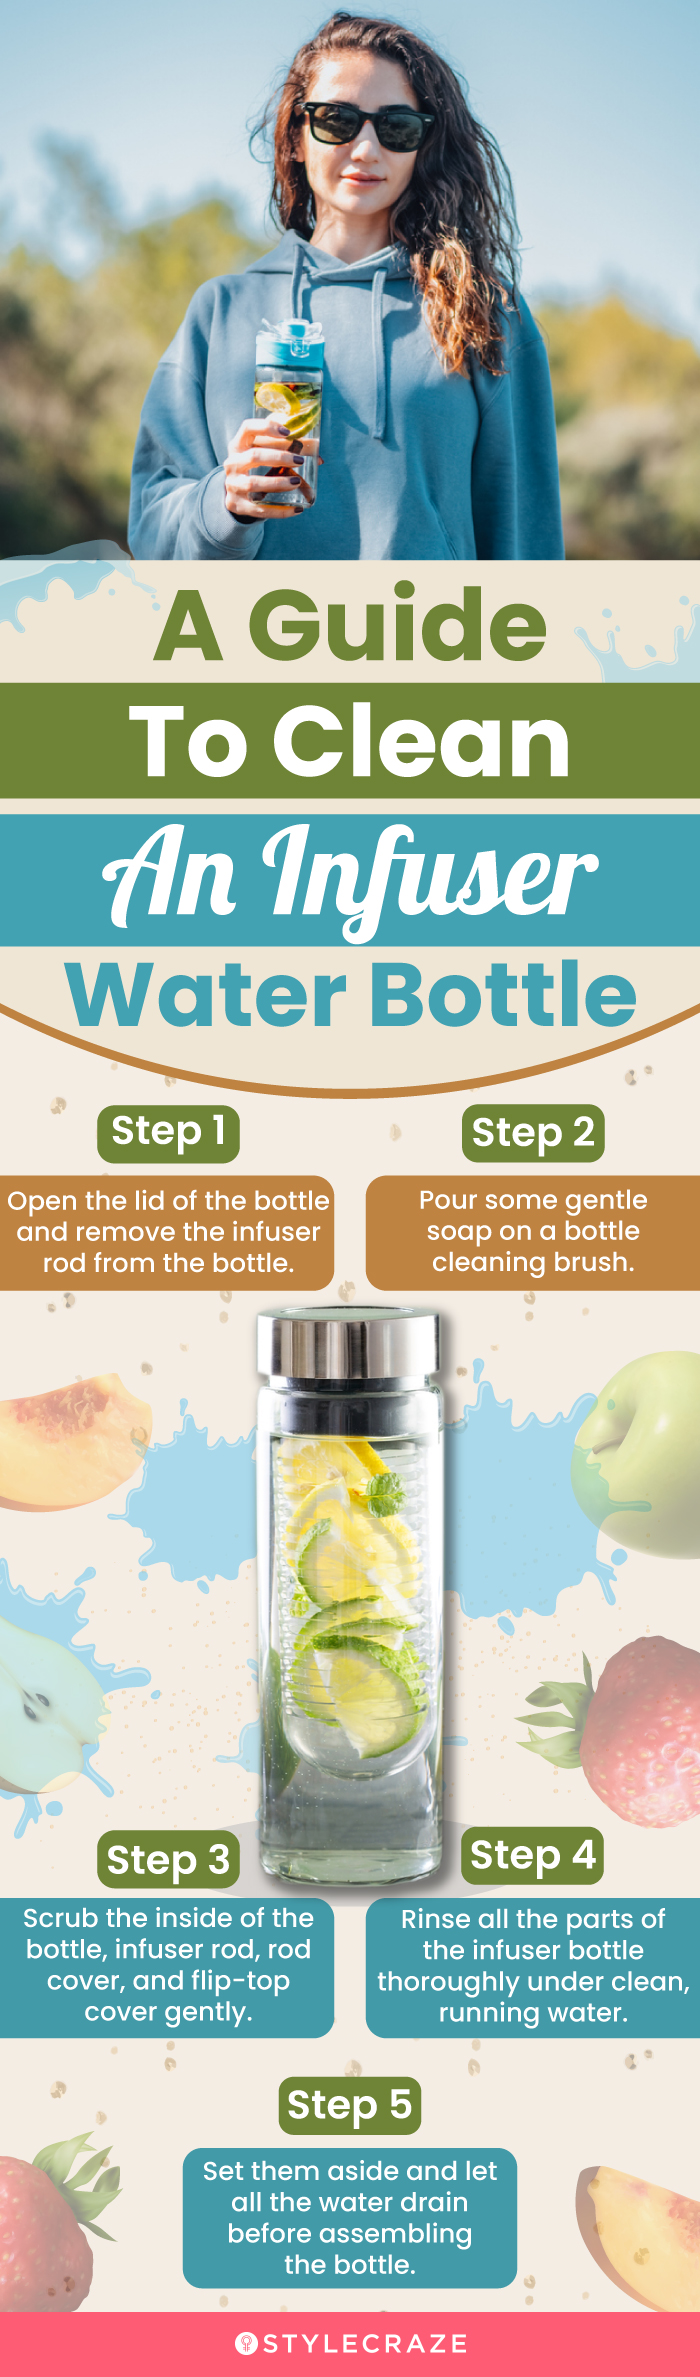 A Guide To Clean An Infuser Water Bottle (infographic)